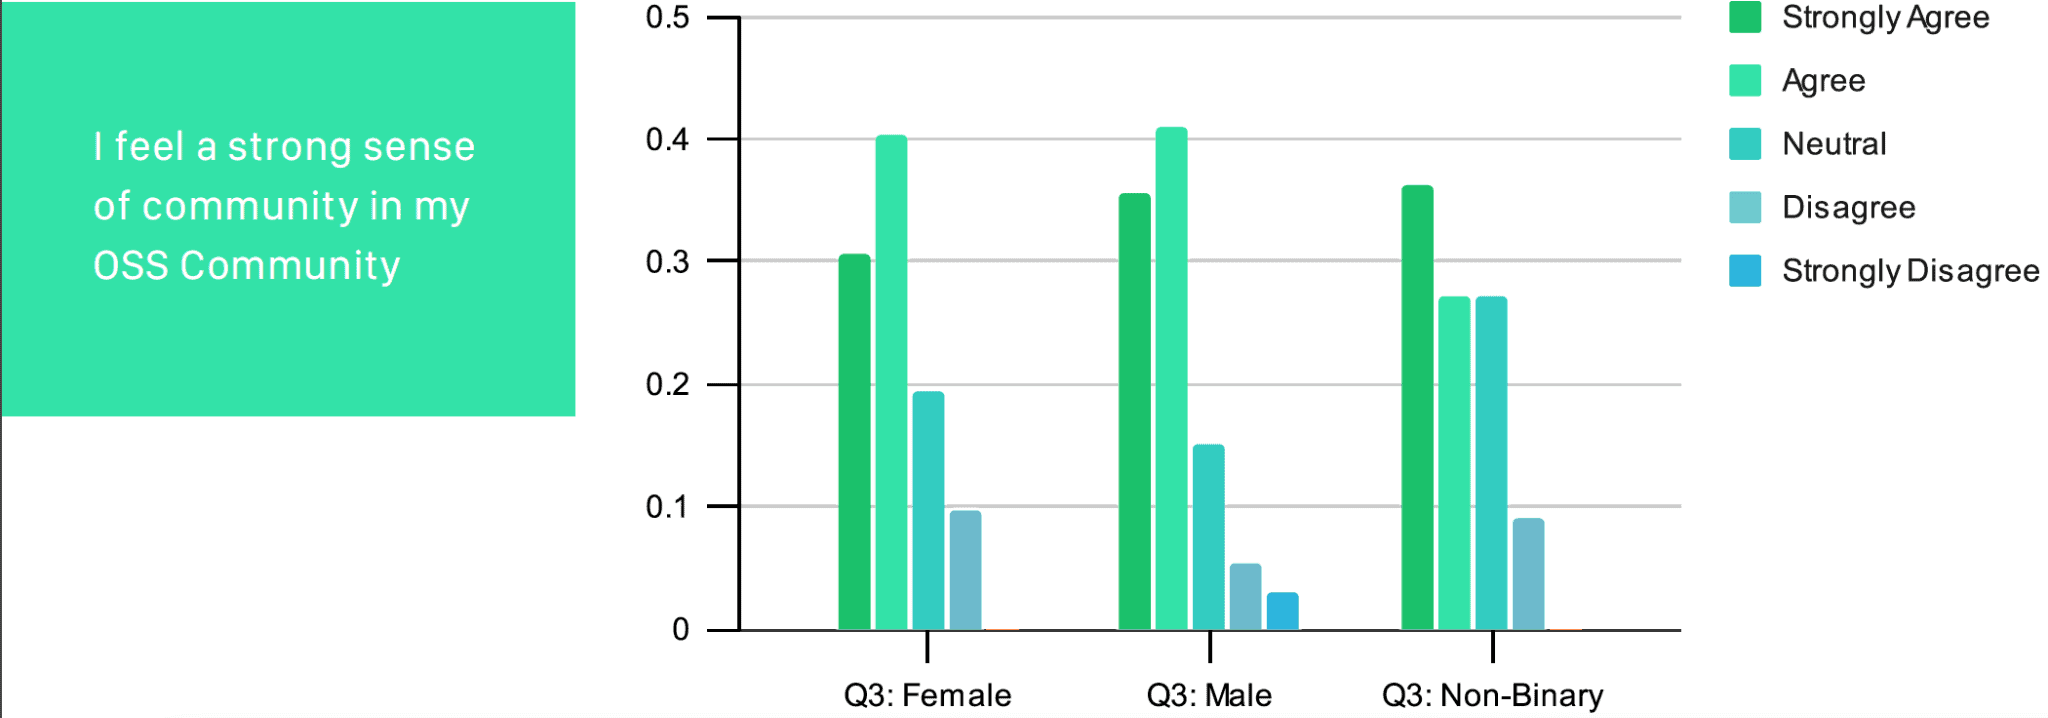 Bar chart showing result of "I feel a strong sense of community in my OSS Community" between: Q3 Female, Male and Non-Binary where Q3 Female and Q3 Male are dominant on "Agree" and Non-Binary are dominant on "Strongly Agree" 